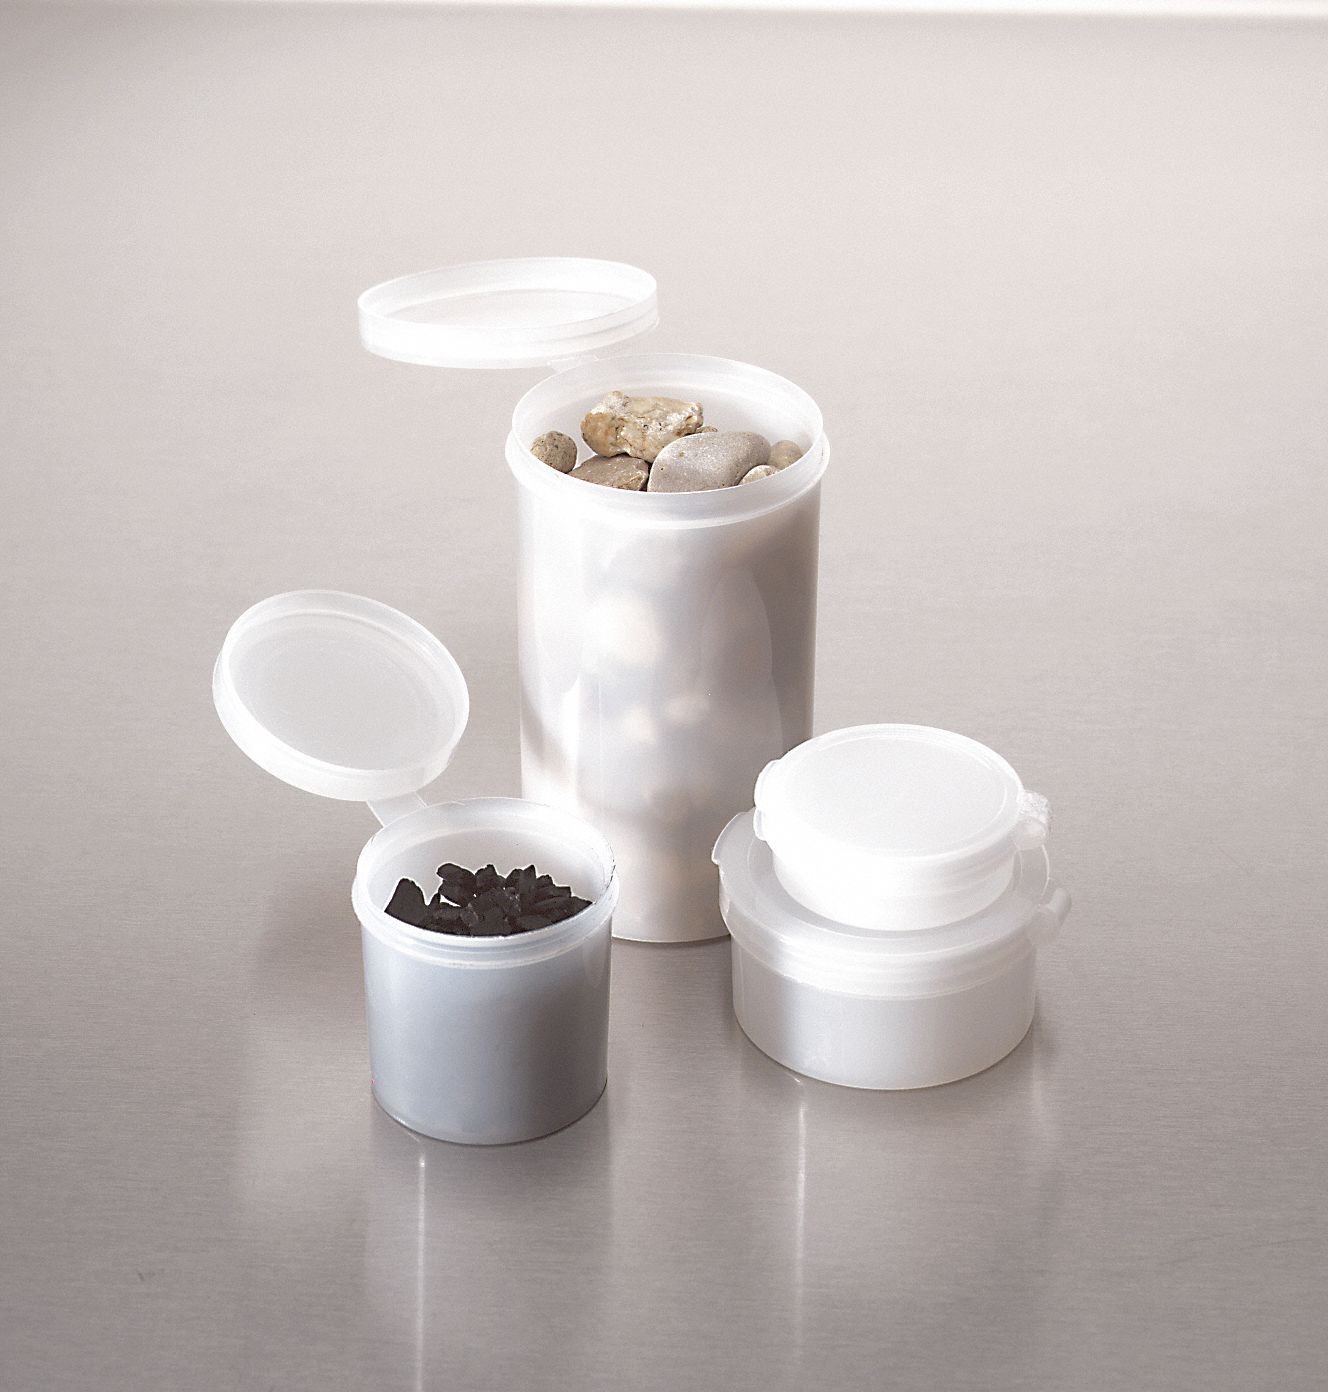 0.25 oz. Sample Container, Wide Mouth, Polyethylene, PK 100